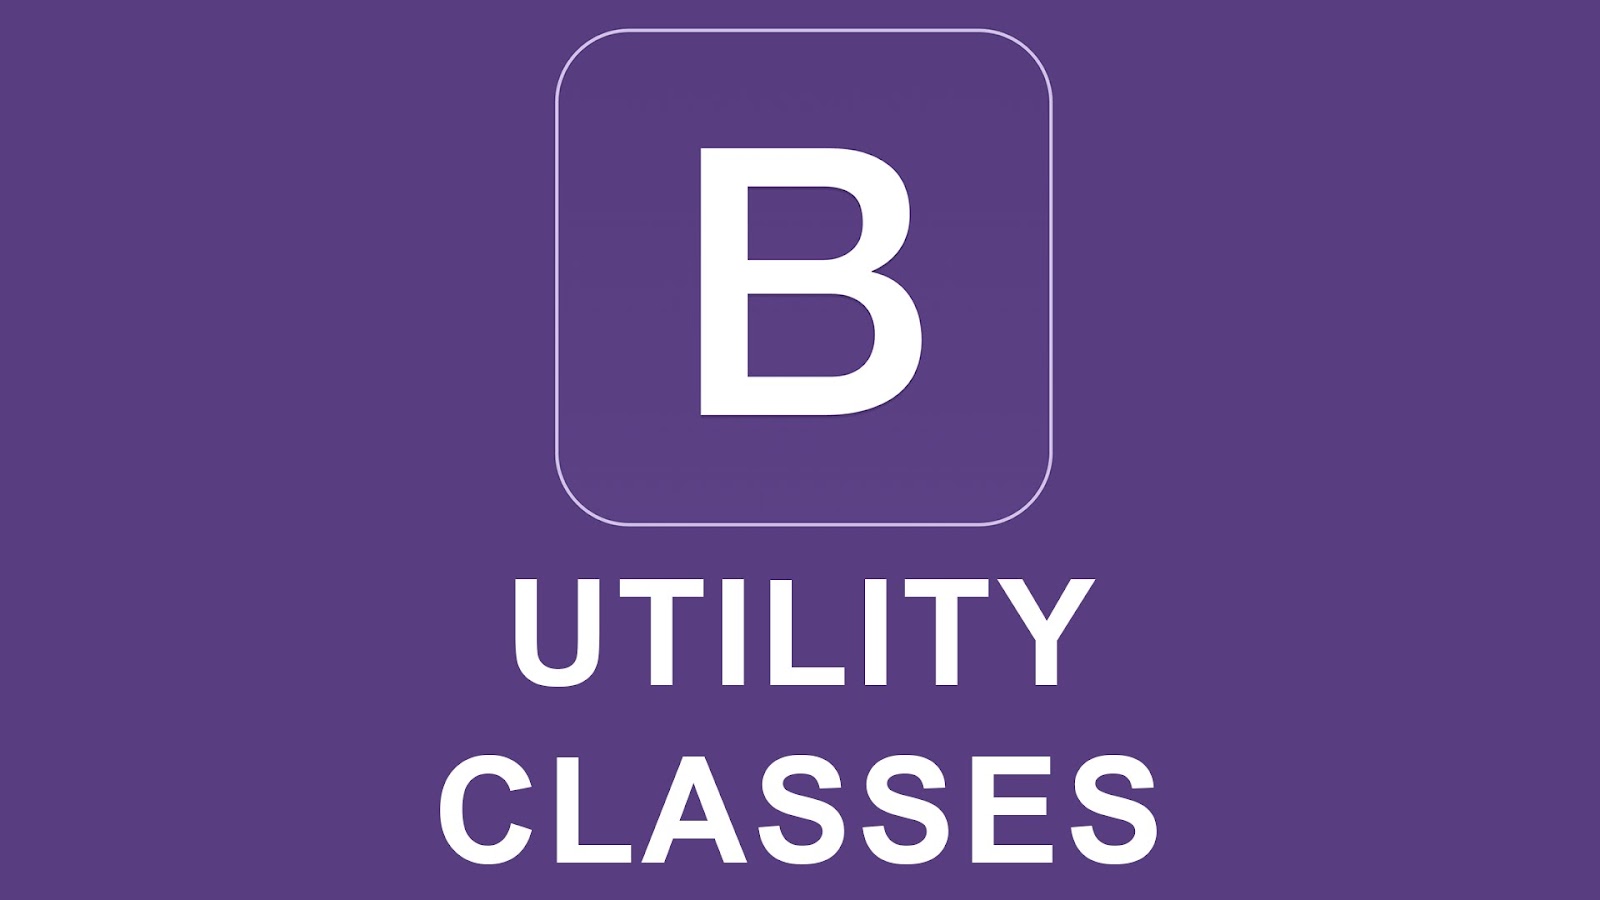 Bootstrap classes